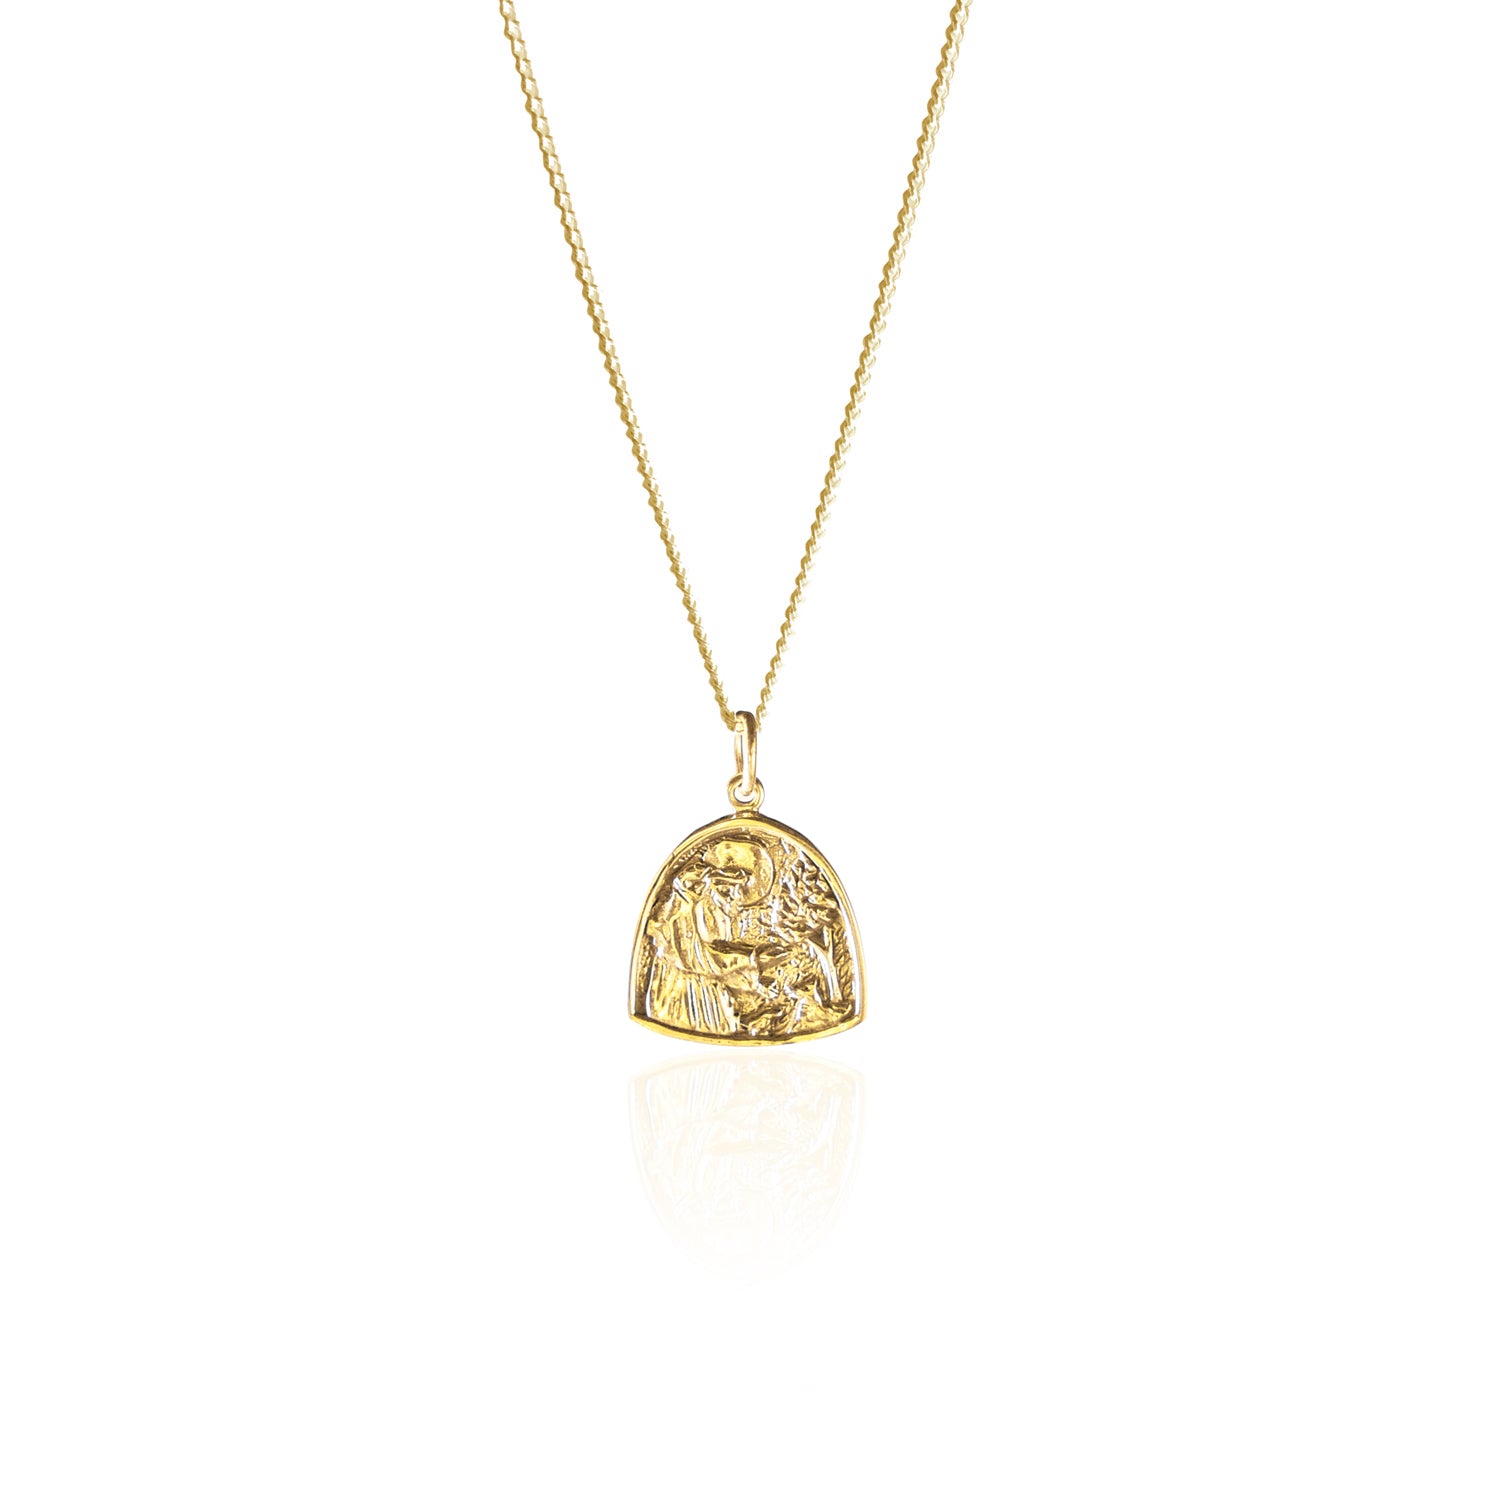 St Assisi Patron Saint of Animals Pendant made from Recycled Sterling Silver and 18kt Gold